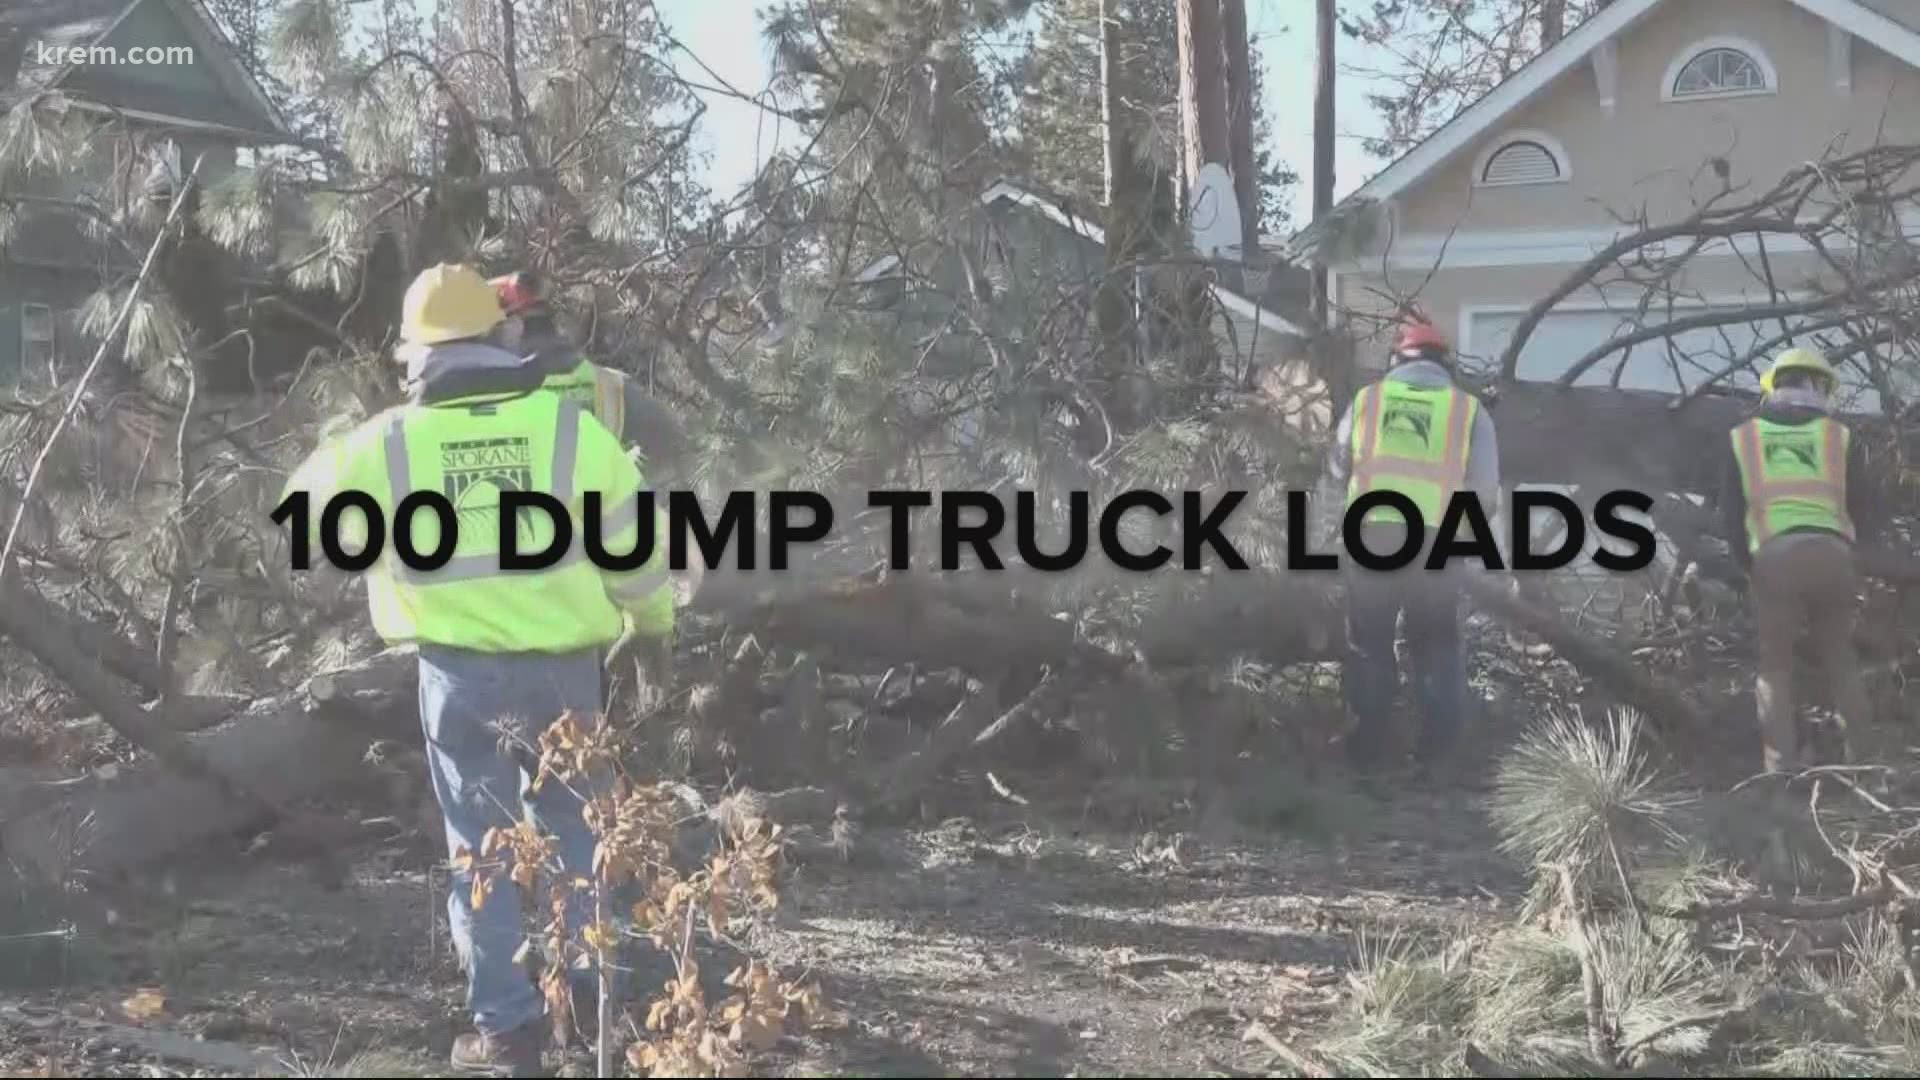 The deadly windstorm from Jan. 13 left two people dead as it devastated Spokane and left widespread damage across the Inland Northwest.